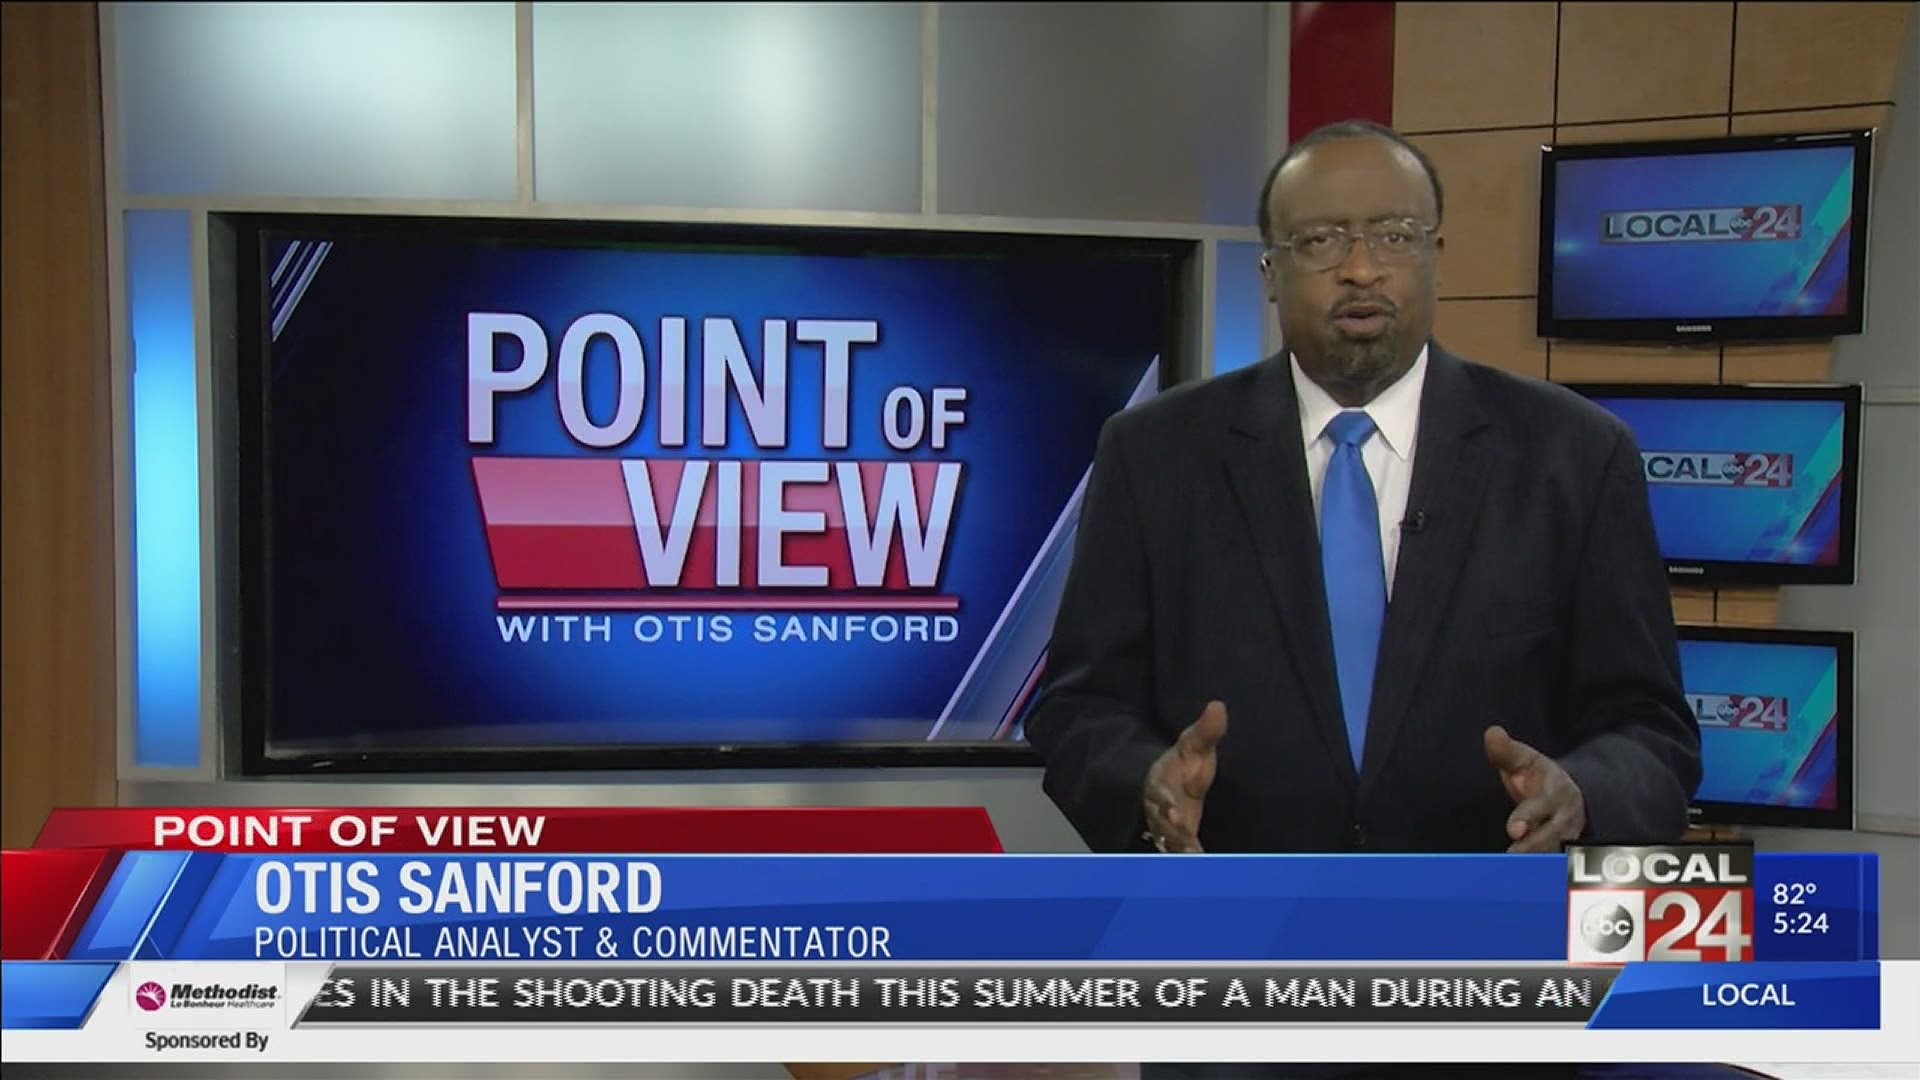 Local 24 News political analyst and commentator Otis Sanford shares his point of view on the latest ruling over school vouchers in Tennessee.